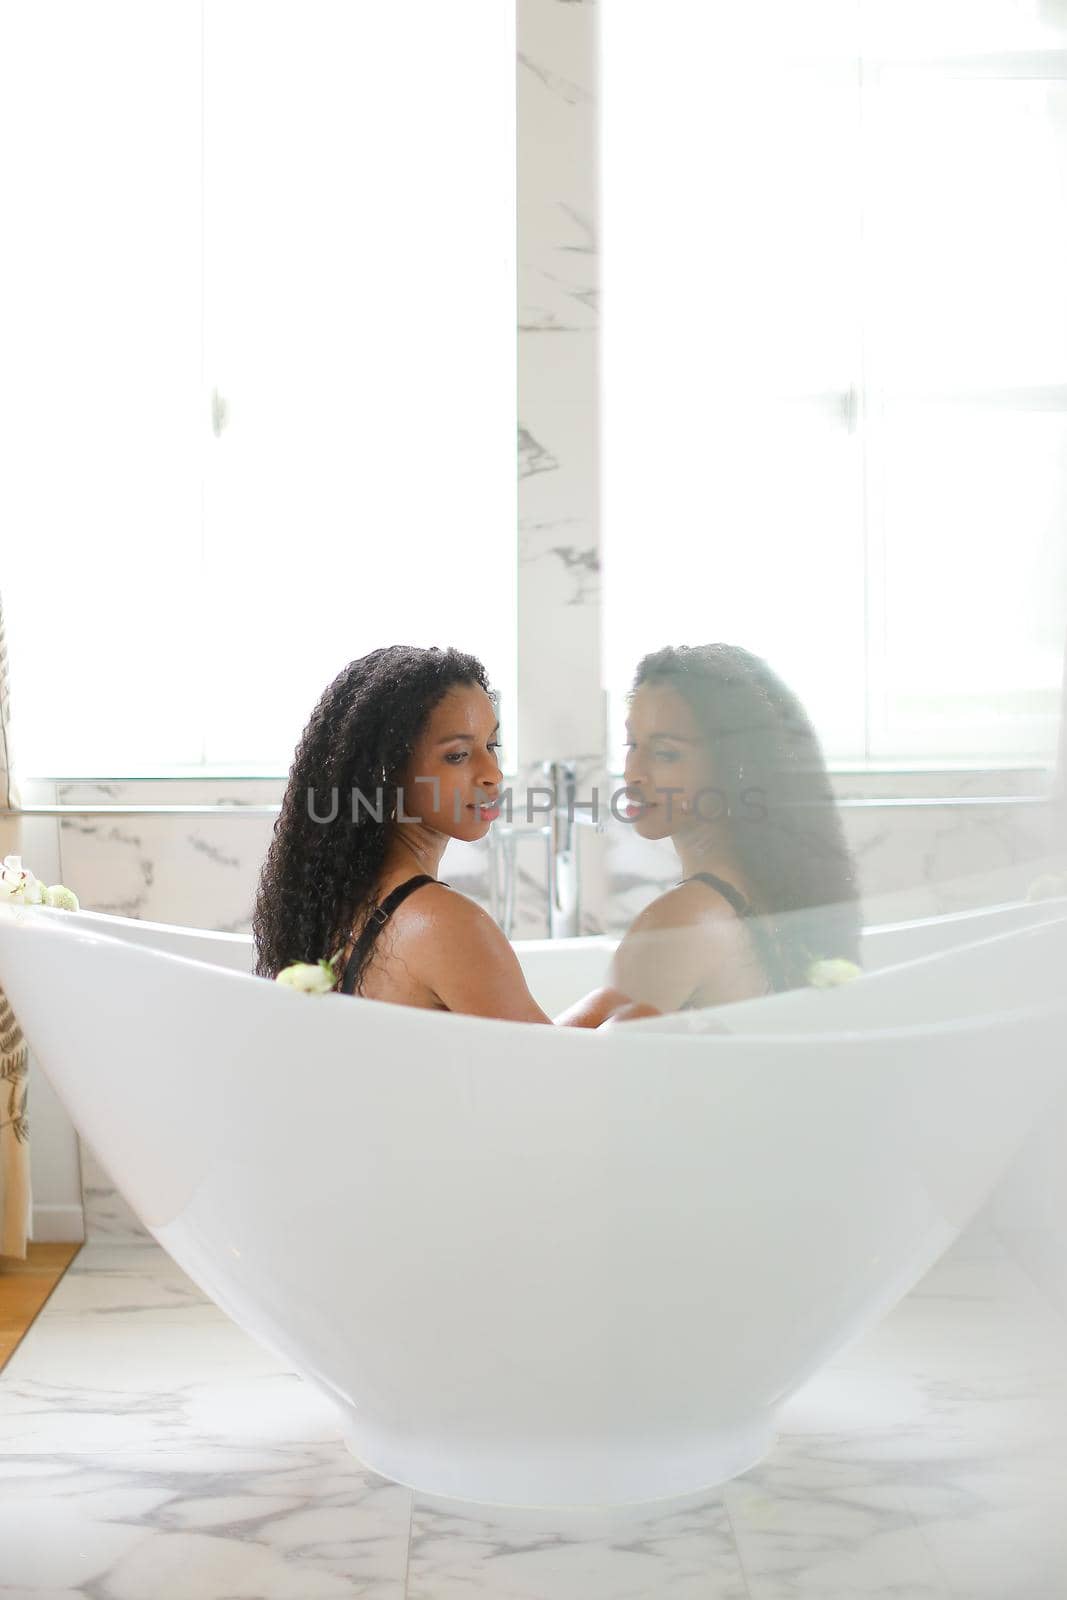 Black girl taking bath and relaxing, reflection in glass. by sisterspro